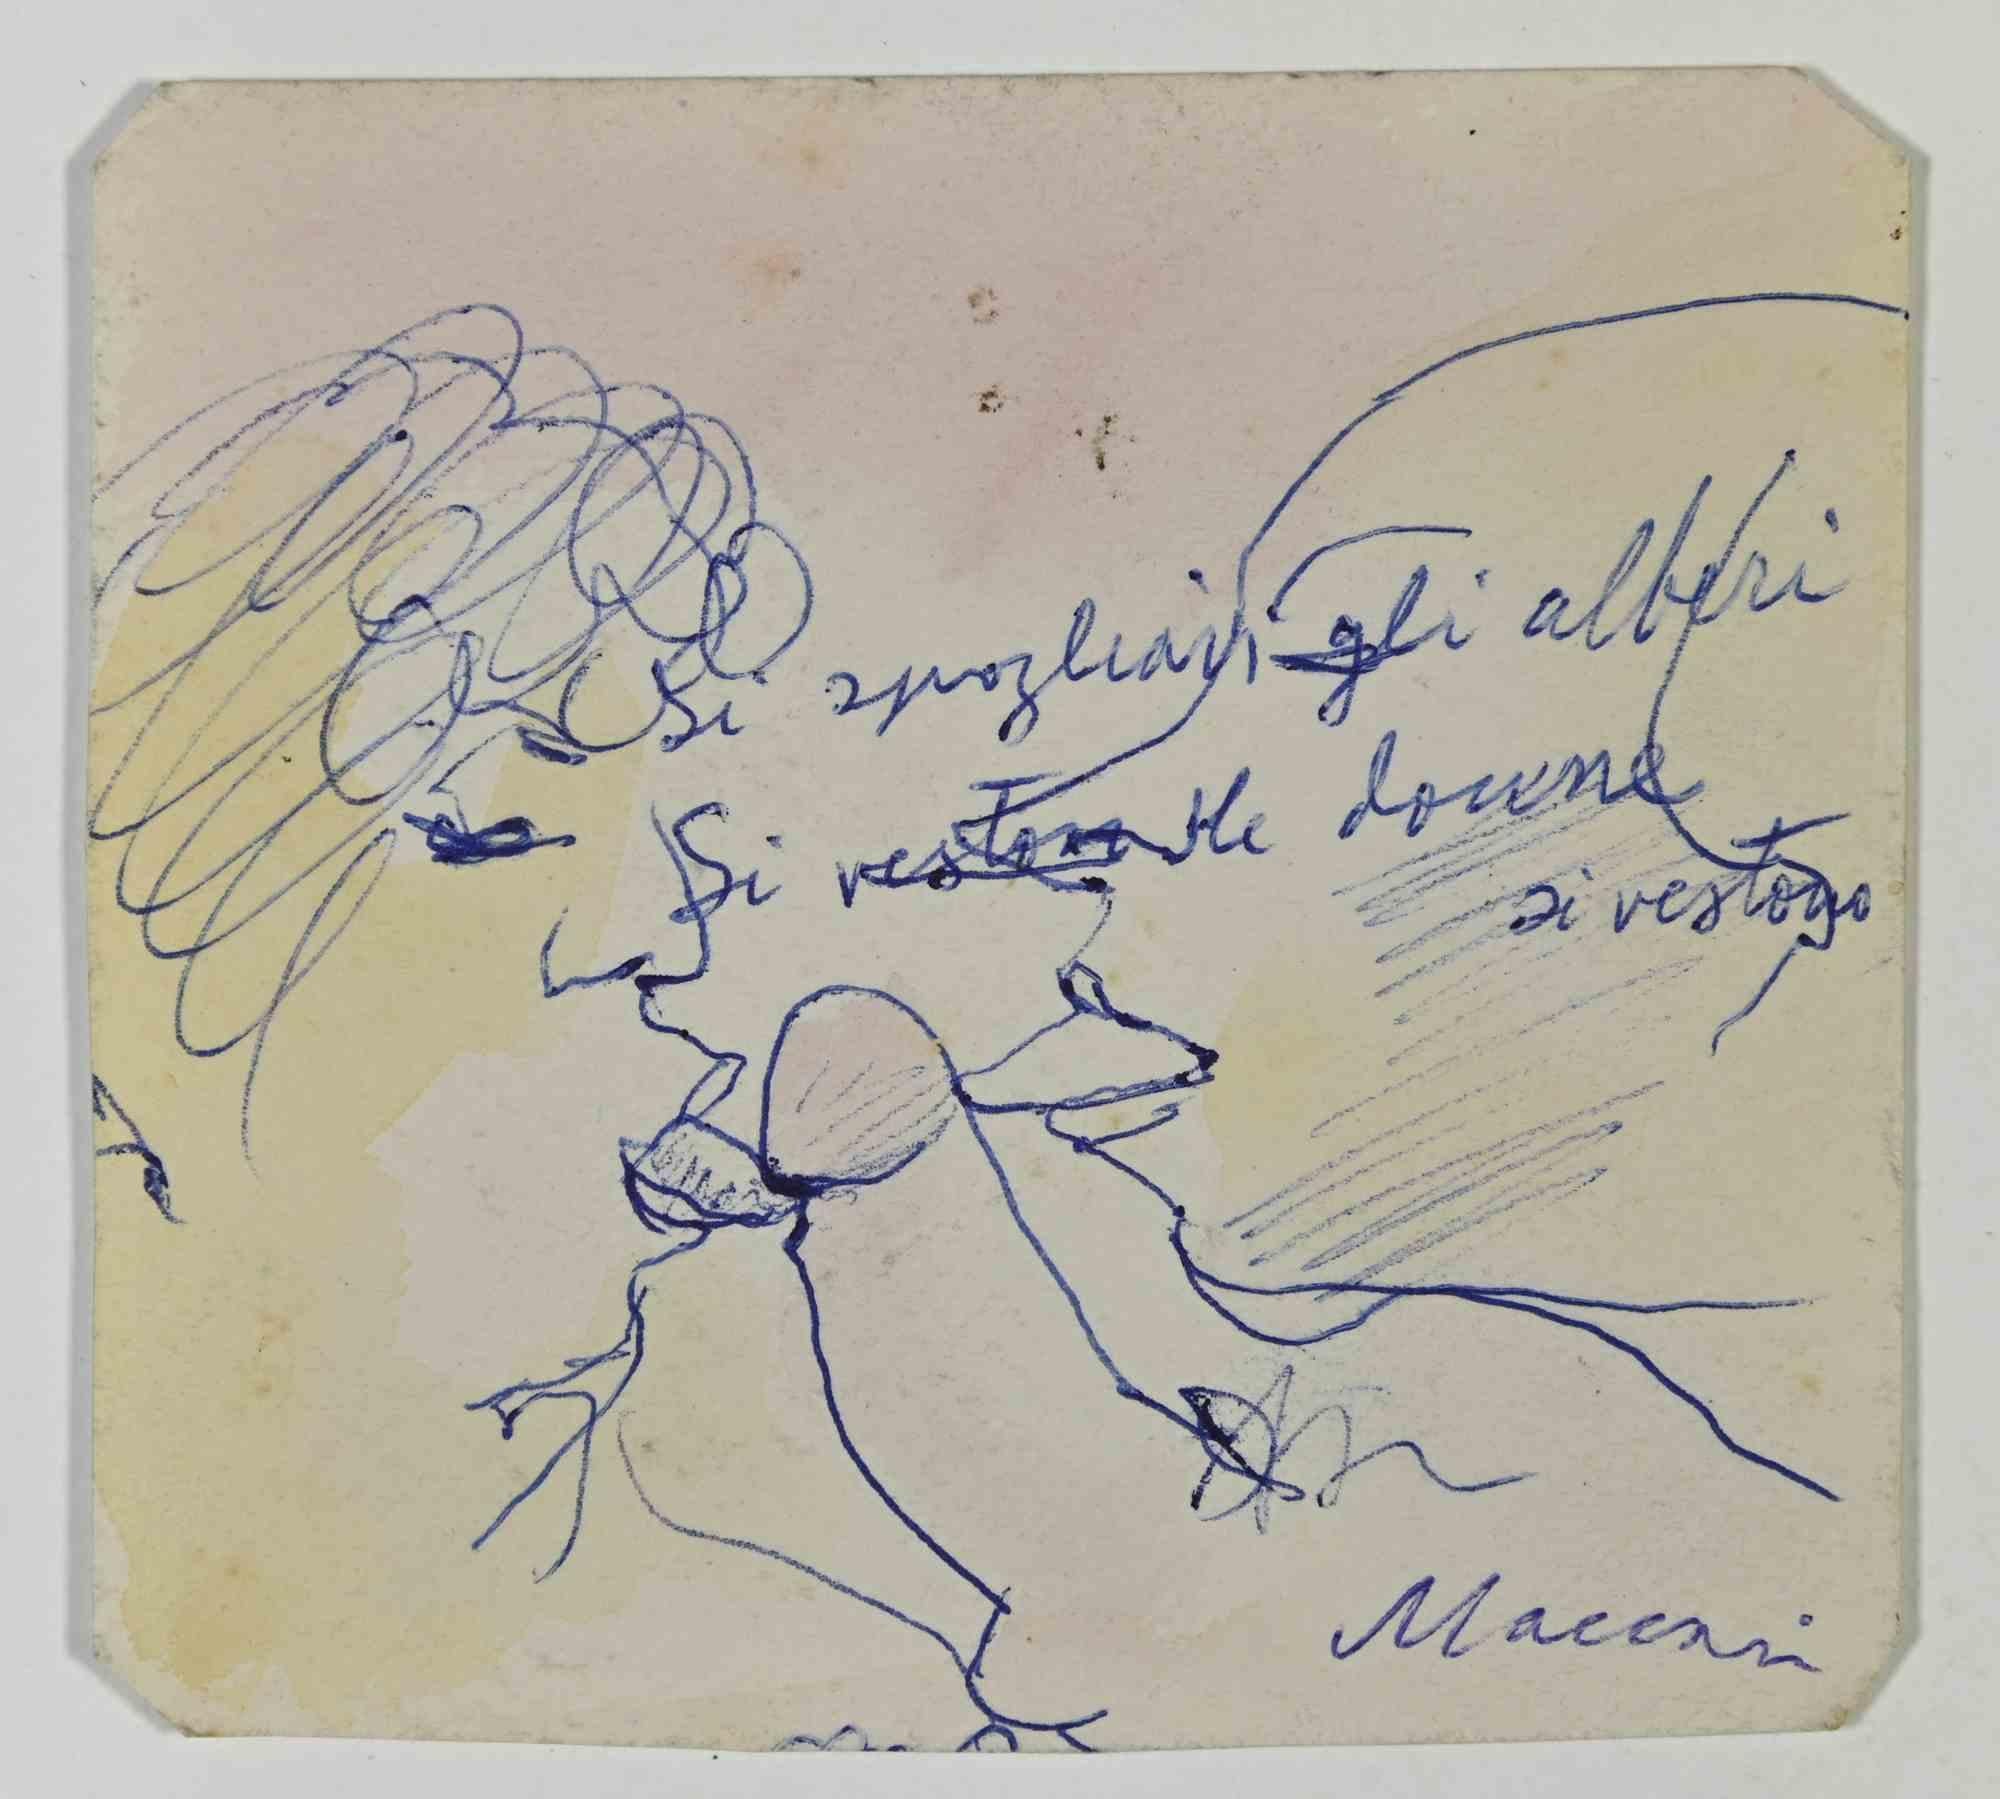 Composition is an Artwork realized by Mino Maccari  (1924-1989) in 1960 ca.

Drawing pen on yellowed paper. Hand Signed on the lower right margin.

Good conditions.

Mino Maccari (Siena, 1924-Rome, June 16, 1989) was an Italian writer, painter,